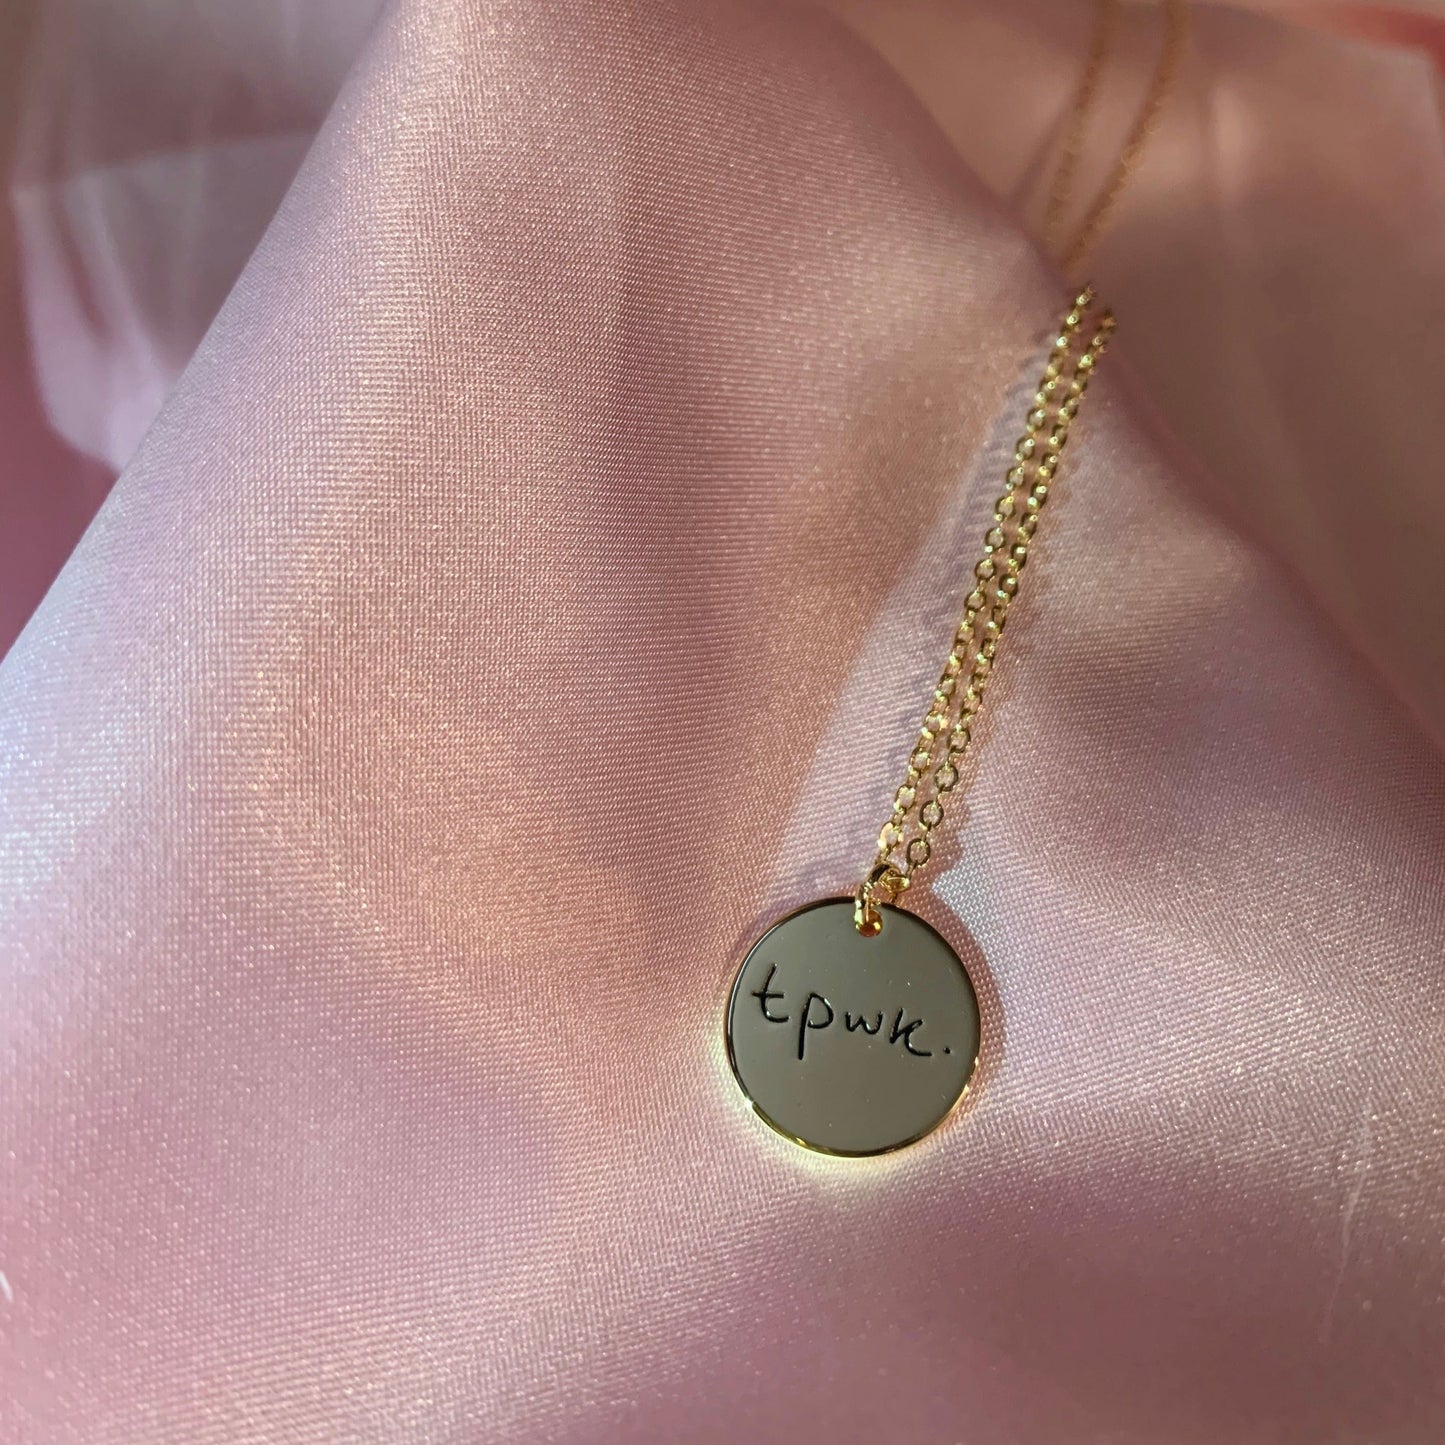 TPWK Gold Necklace